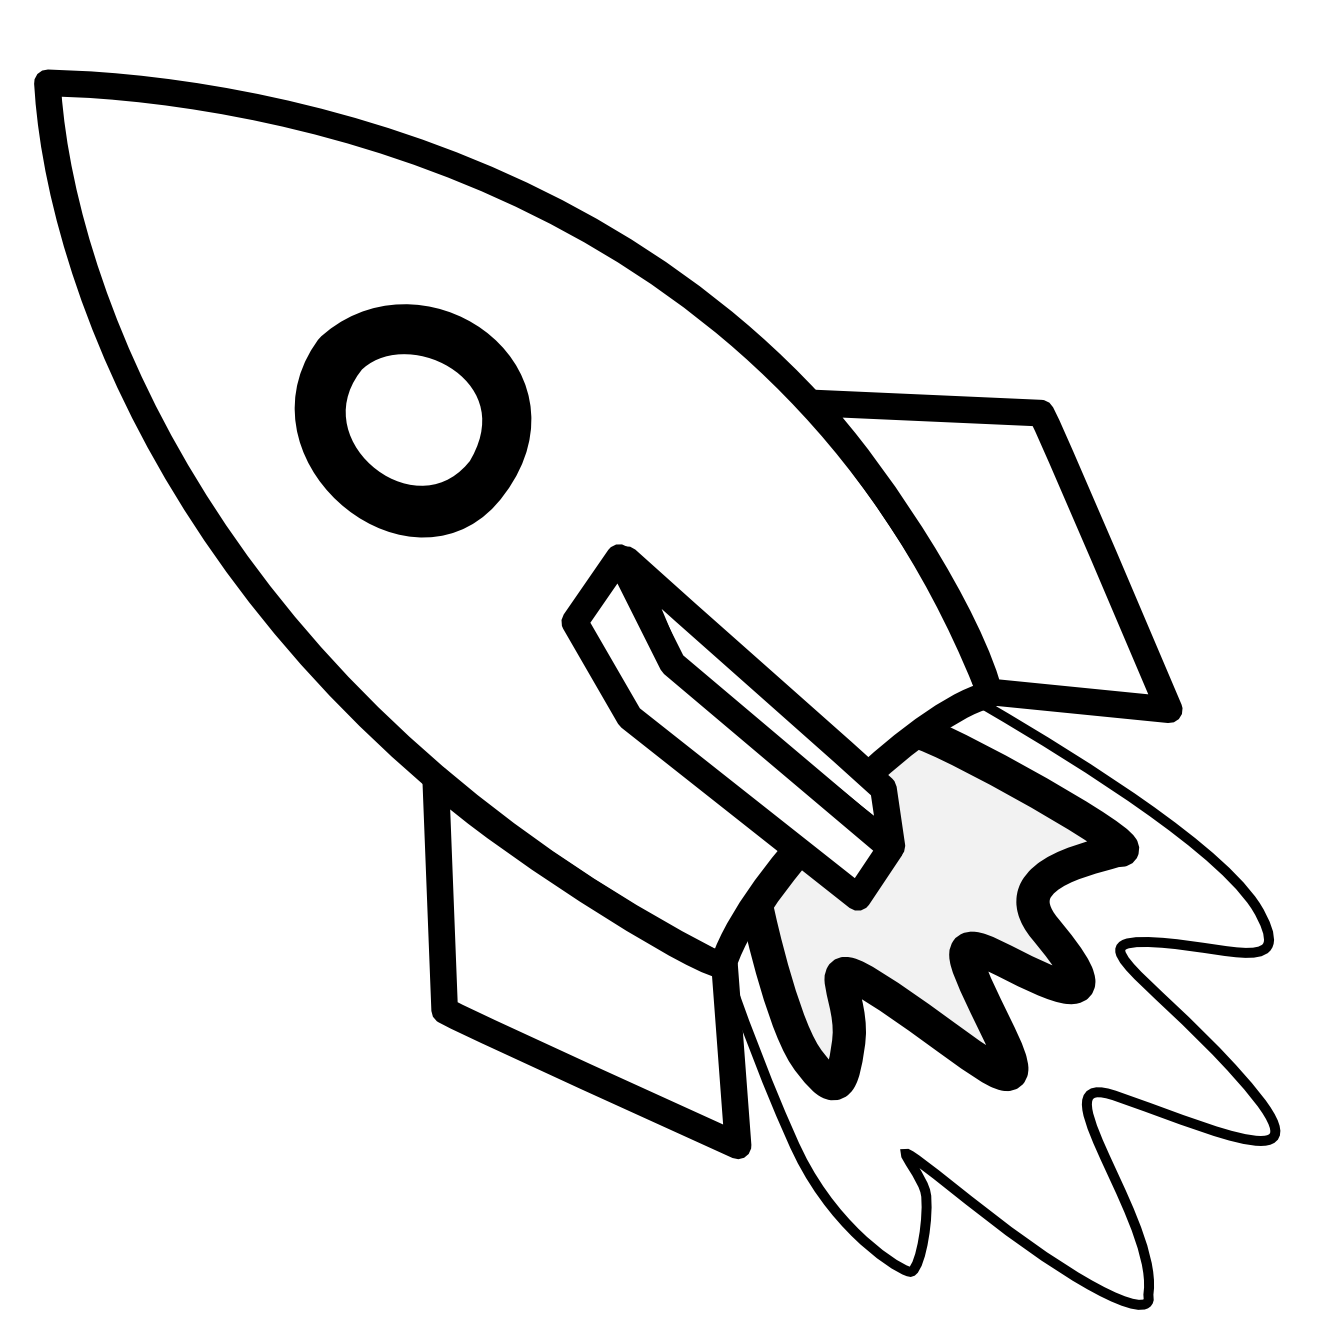 Rocket Template To Color - ClipArt Best